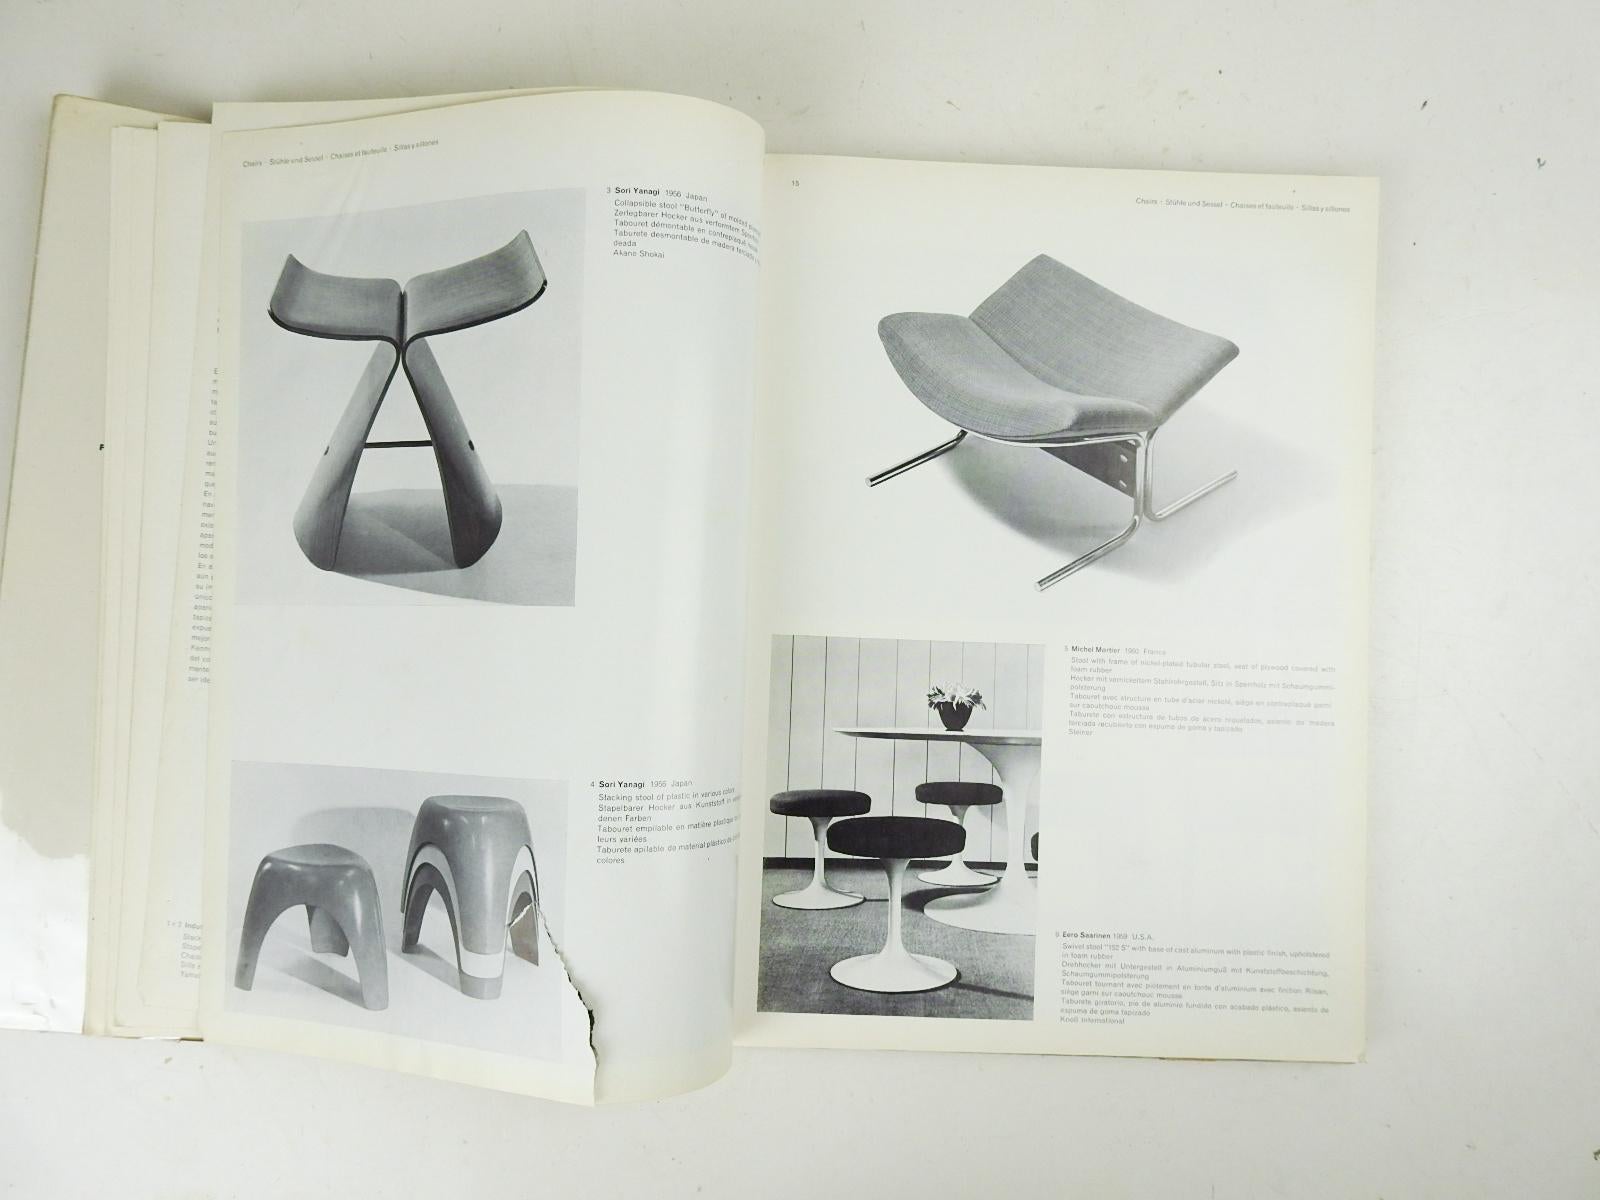 New Furniture 6 edited by Gerd Hatje.  Published by Frederic A. Praeger, New York, 1962.  The sixth volume in this important series on contemporary furniture of the 1960s. Gray cloth hardcover binding, illustrated dust jacket, mylar cover, edge